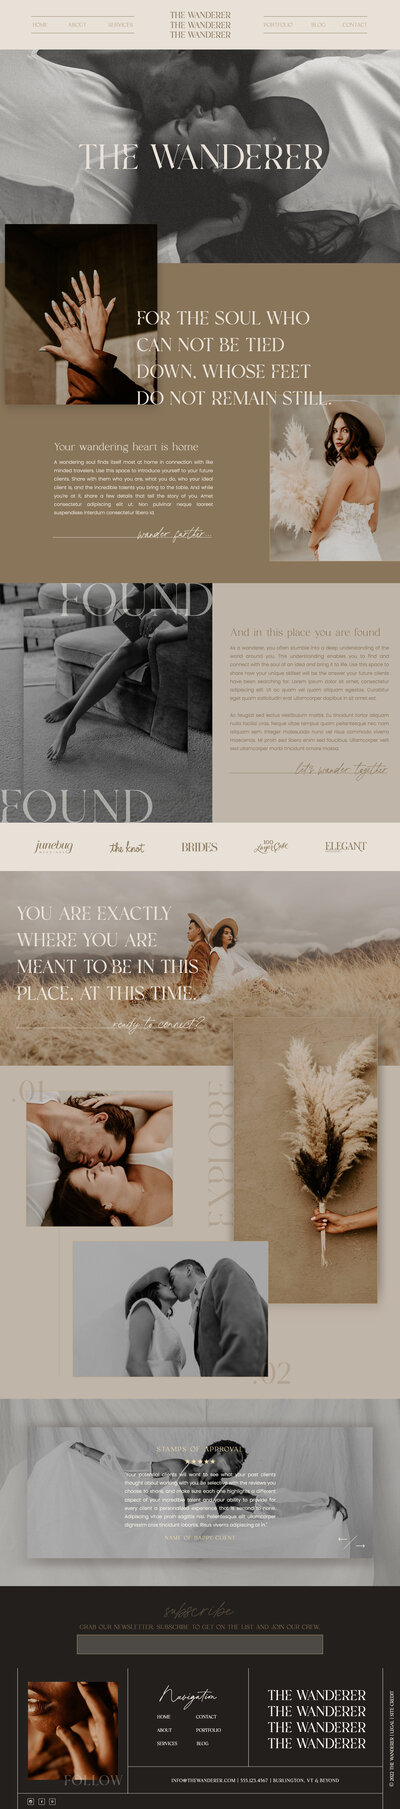 the wanderer website in a neutral color palette